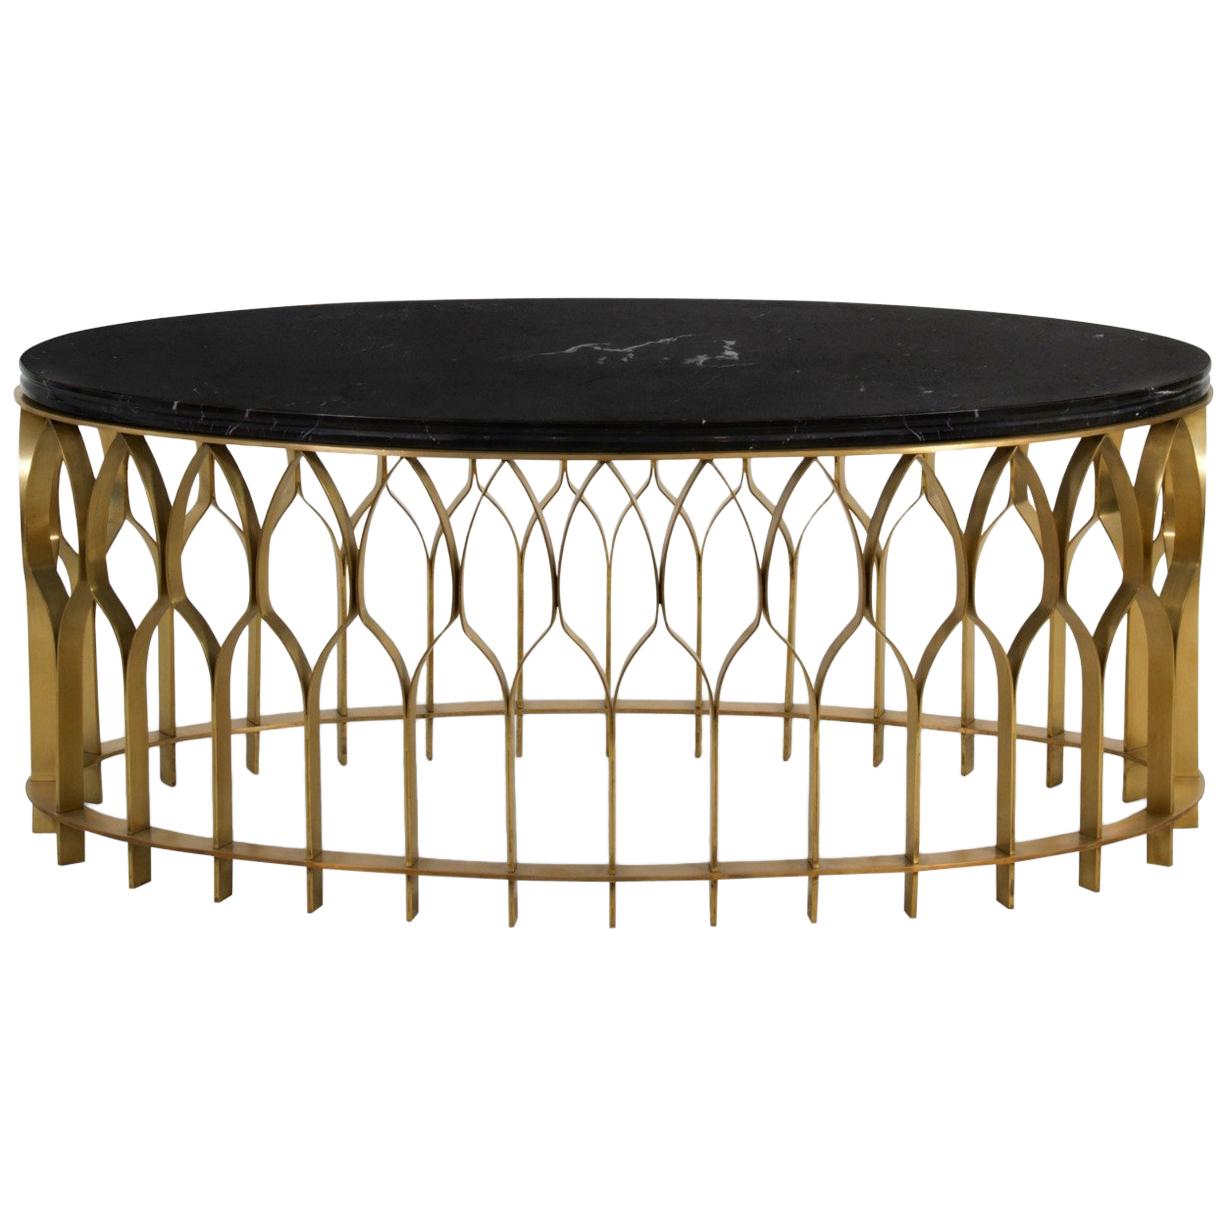 Mecca II Center Table with Black Marble Top and Brass Base by Brabbu For Sale